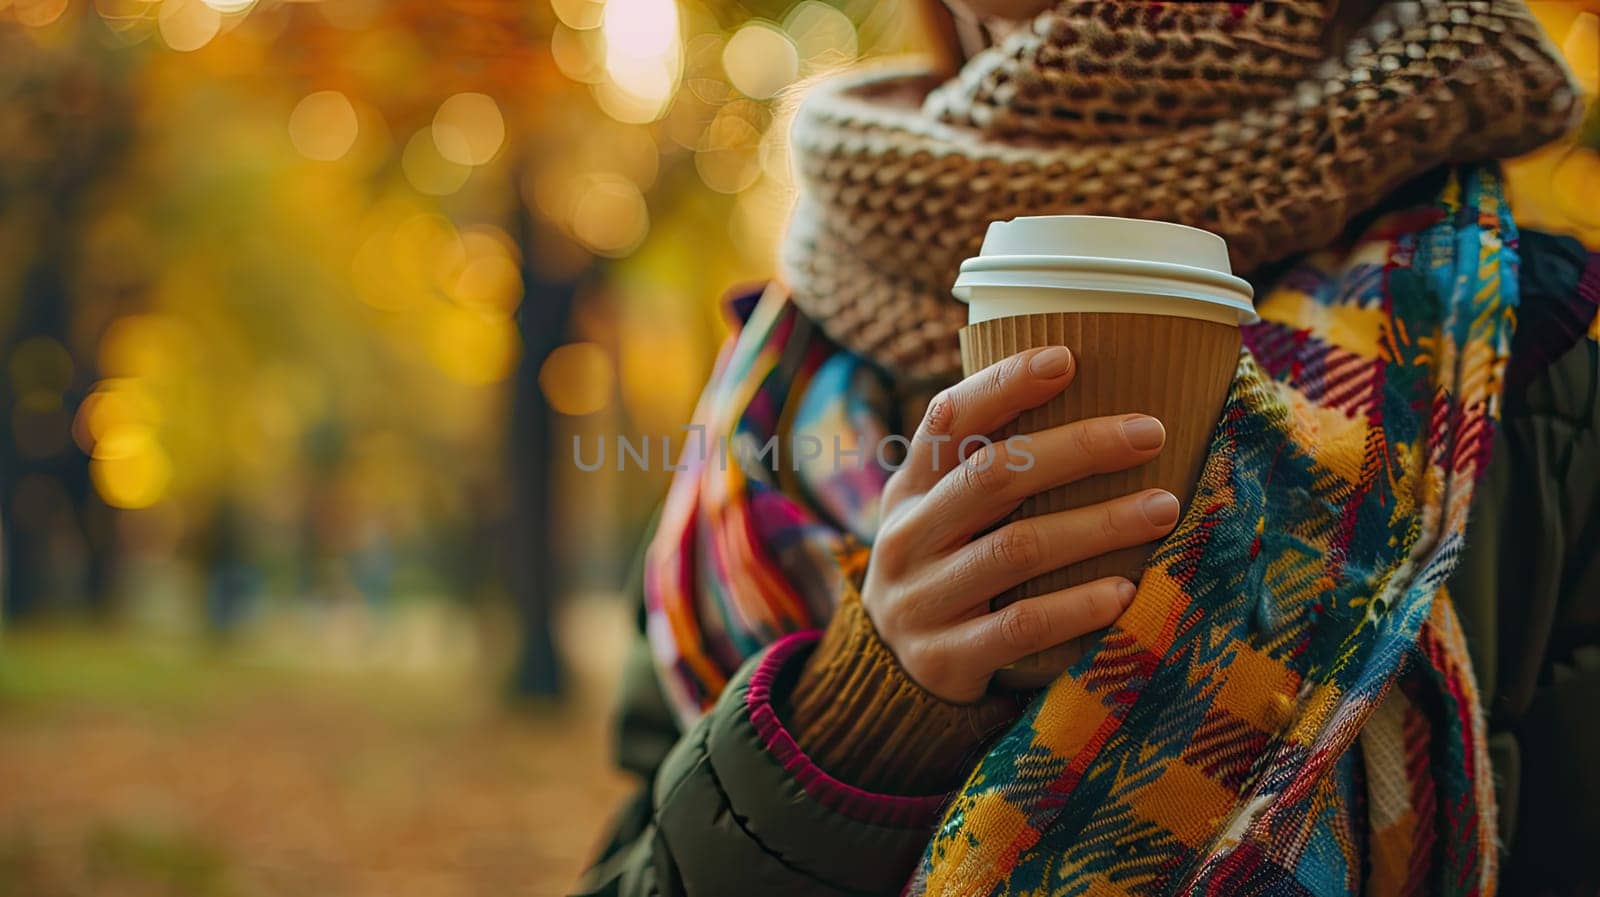 A glass of coffee in a woman's hand in the park. Selective focus. nature.